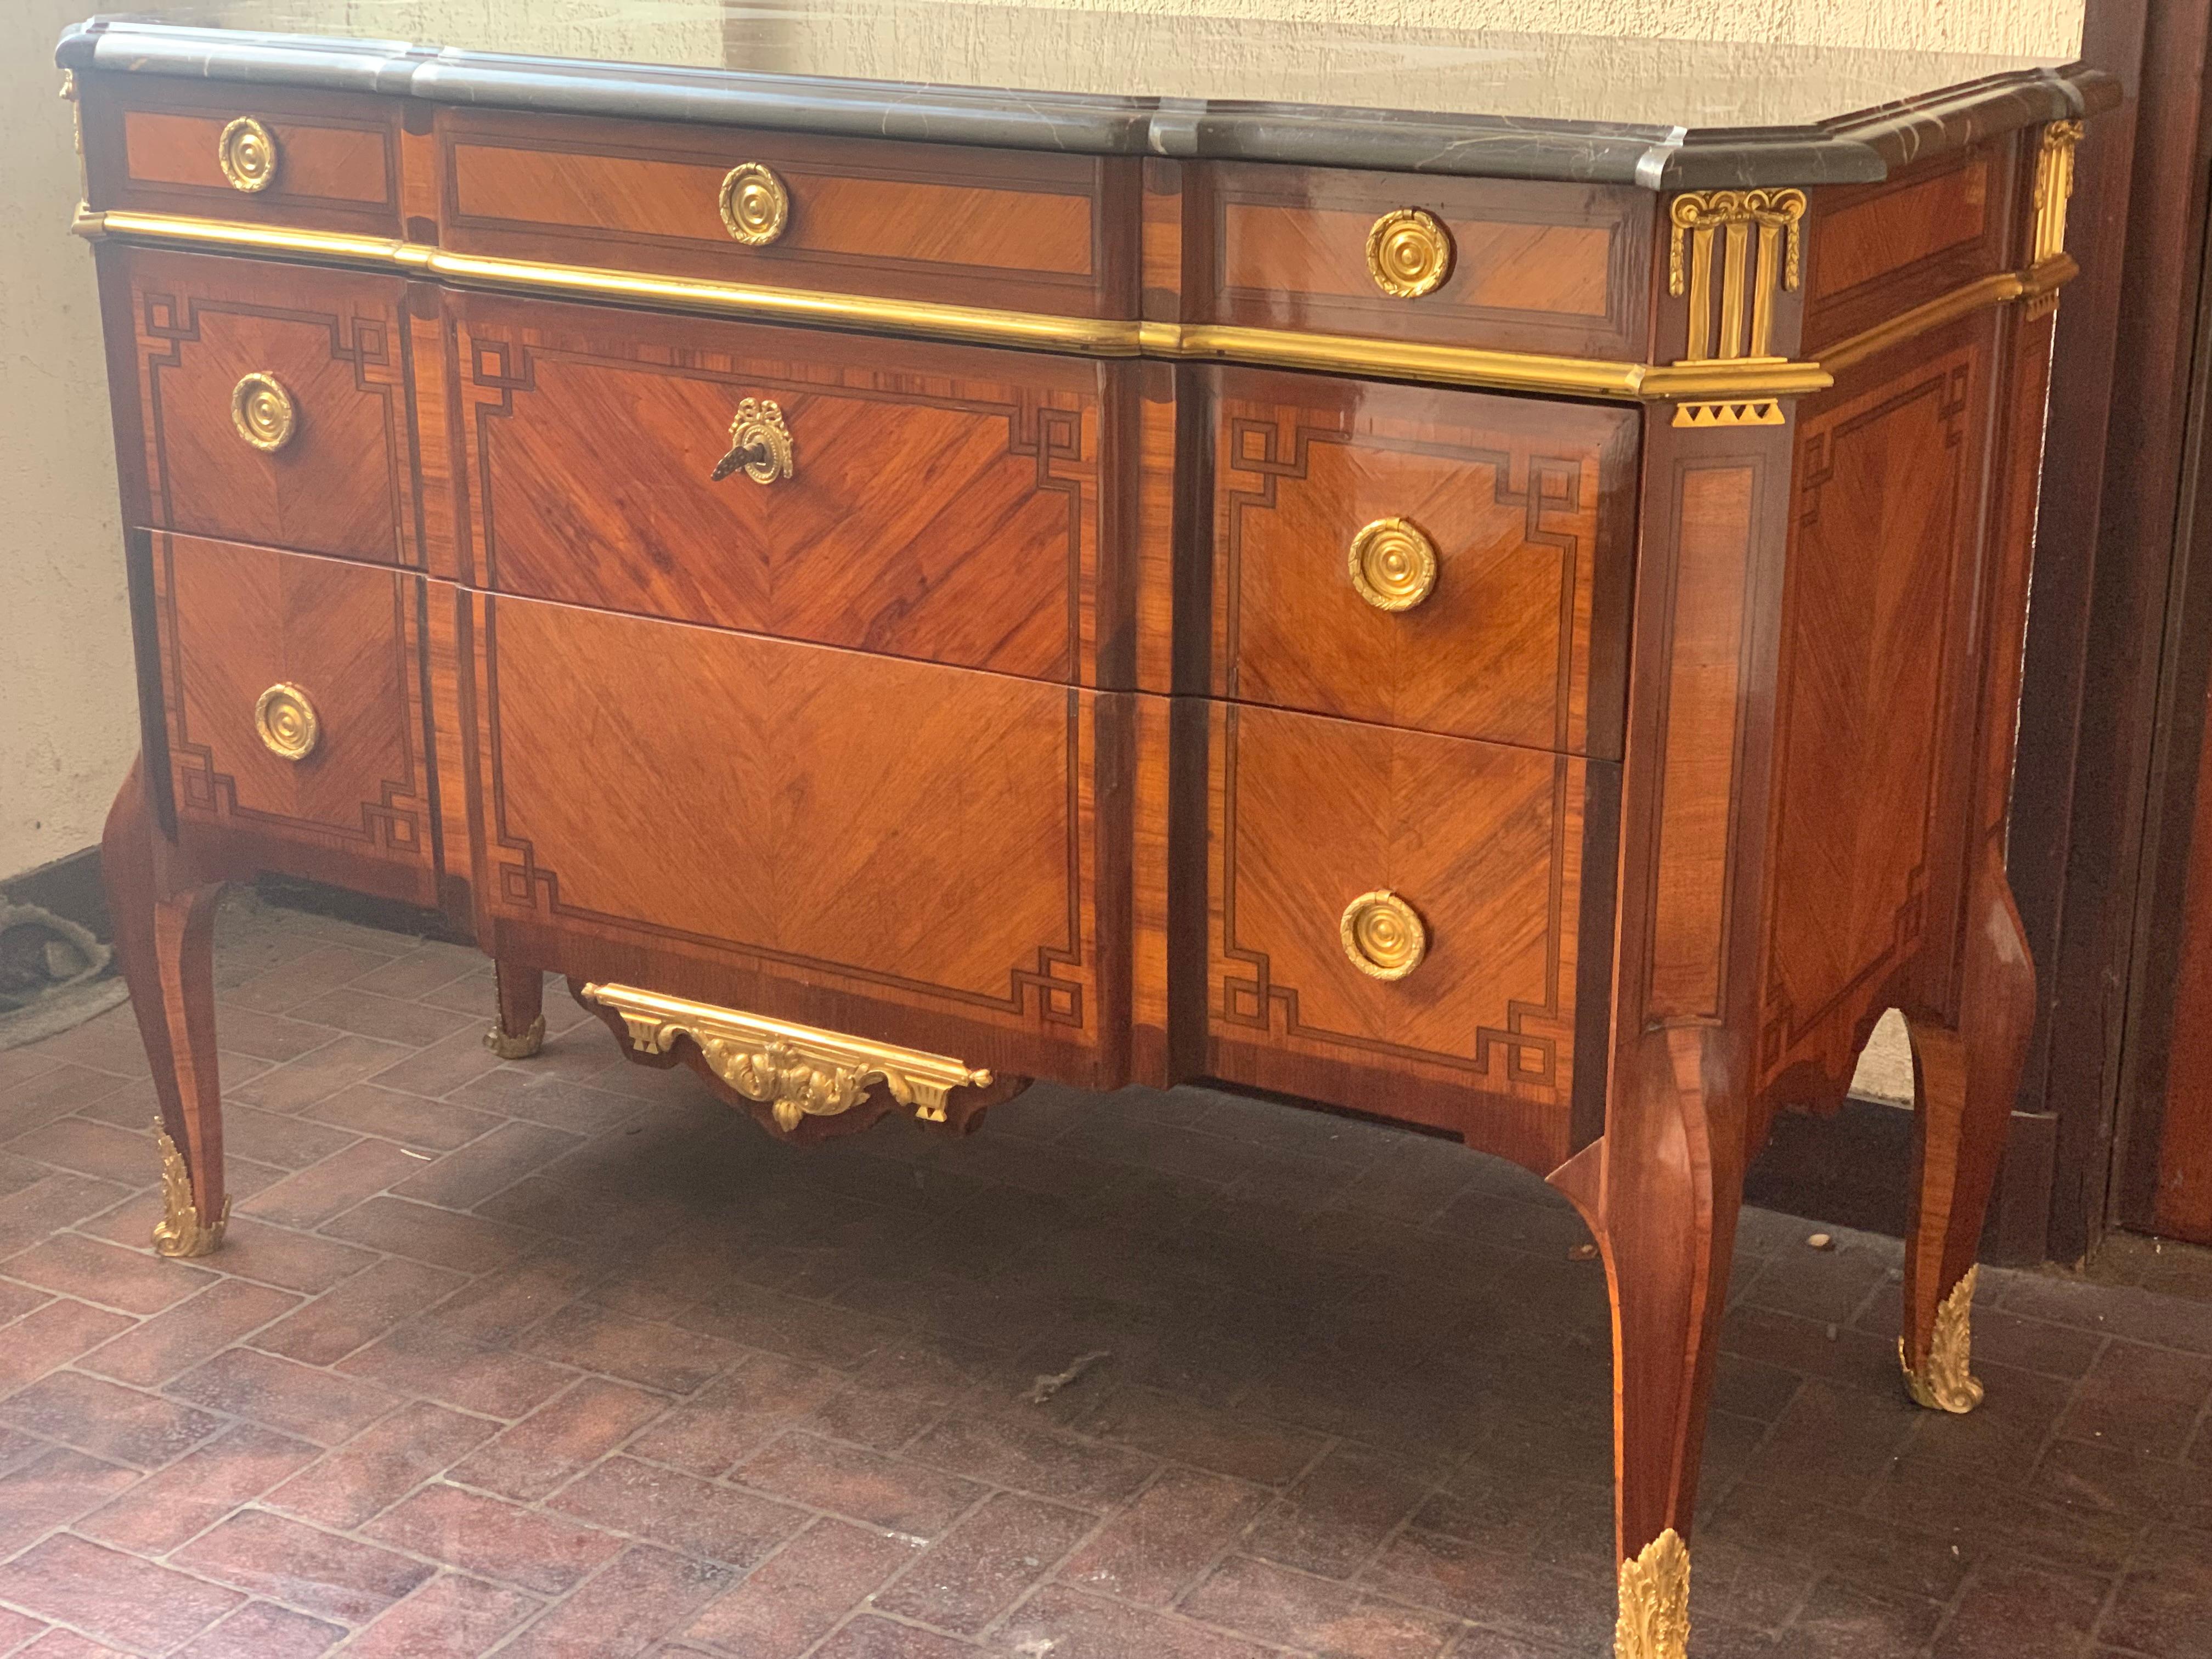 Louis XV, louis XVI transition style chest of drawers, marble top marquetry and bronze
stamped twice by the cabinetmaker P.Chorier and also by maison Soubrier one of the famous retailer of this time establish at the Faubourg st Antoine where all the